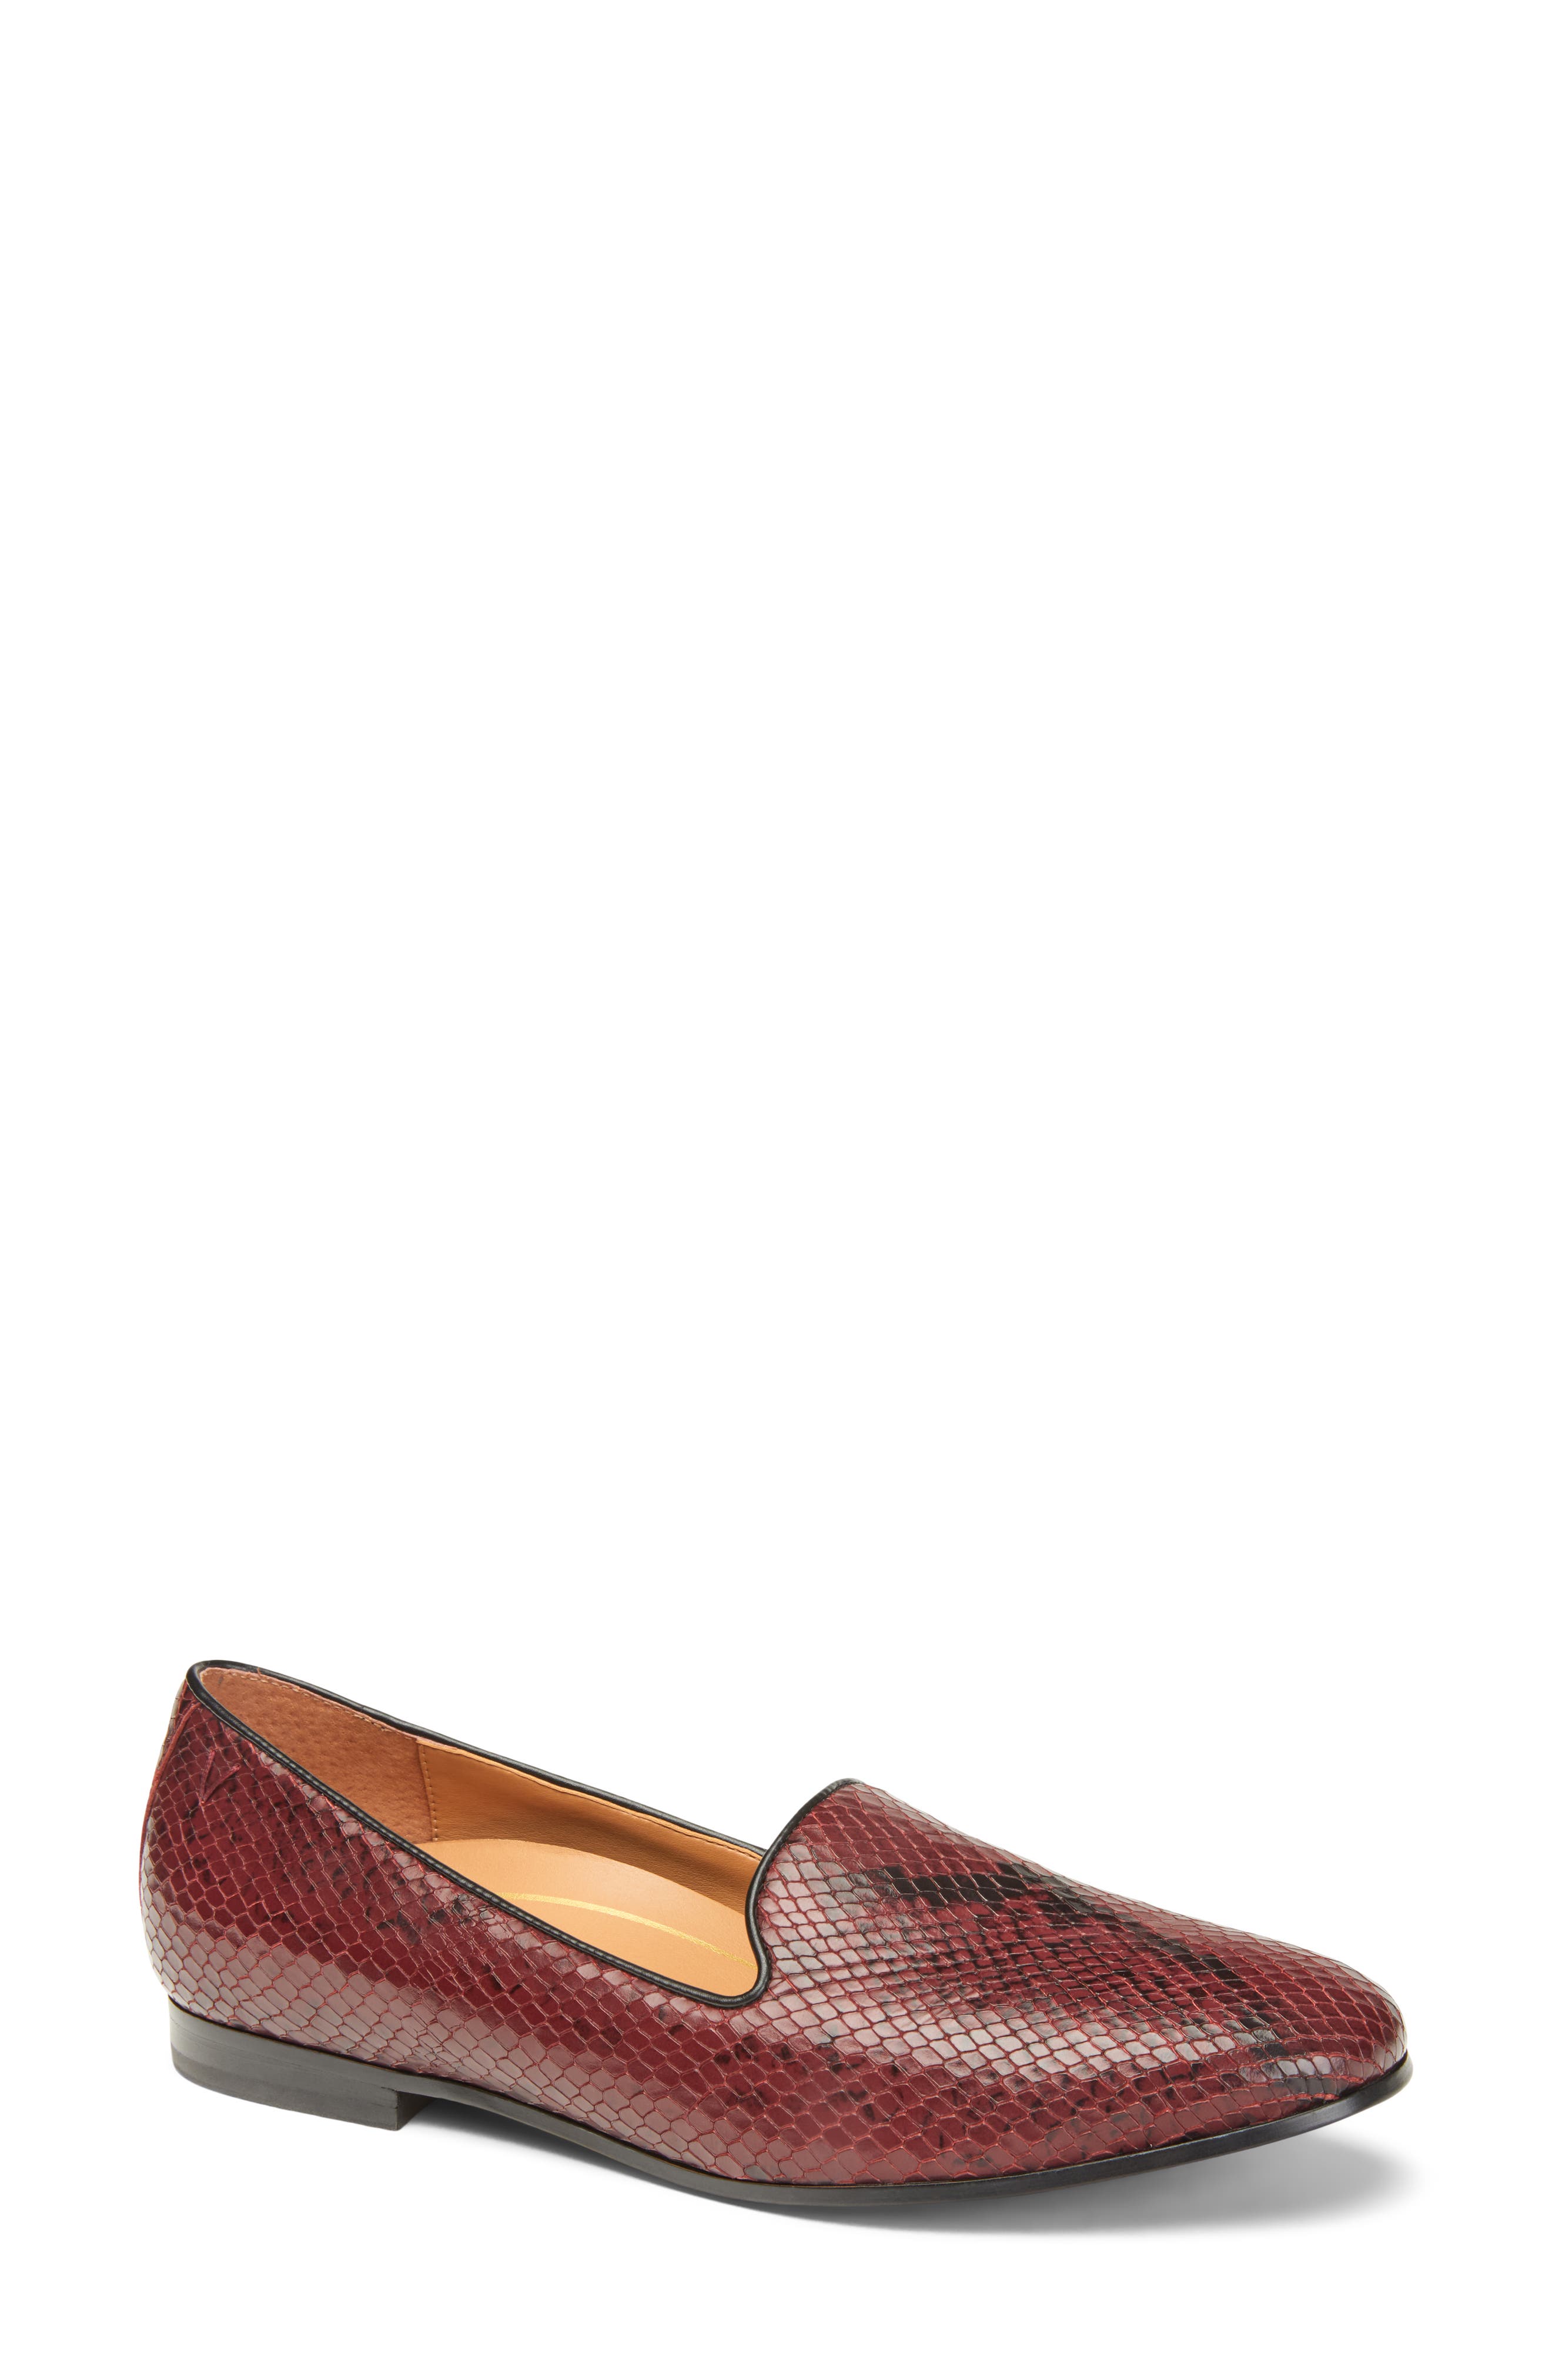 Vionic Willa Loafer In Wine Leather